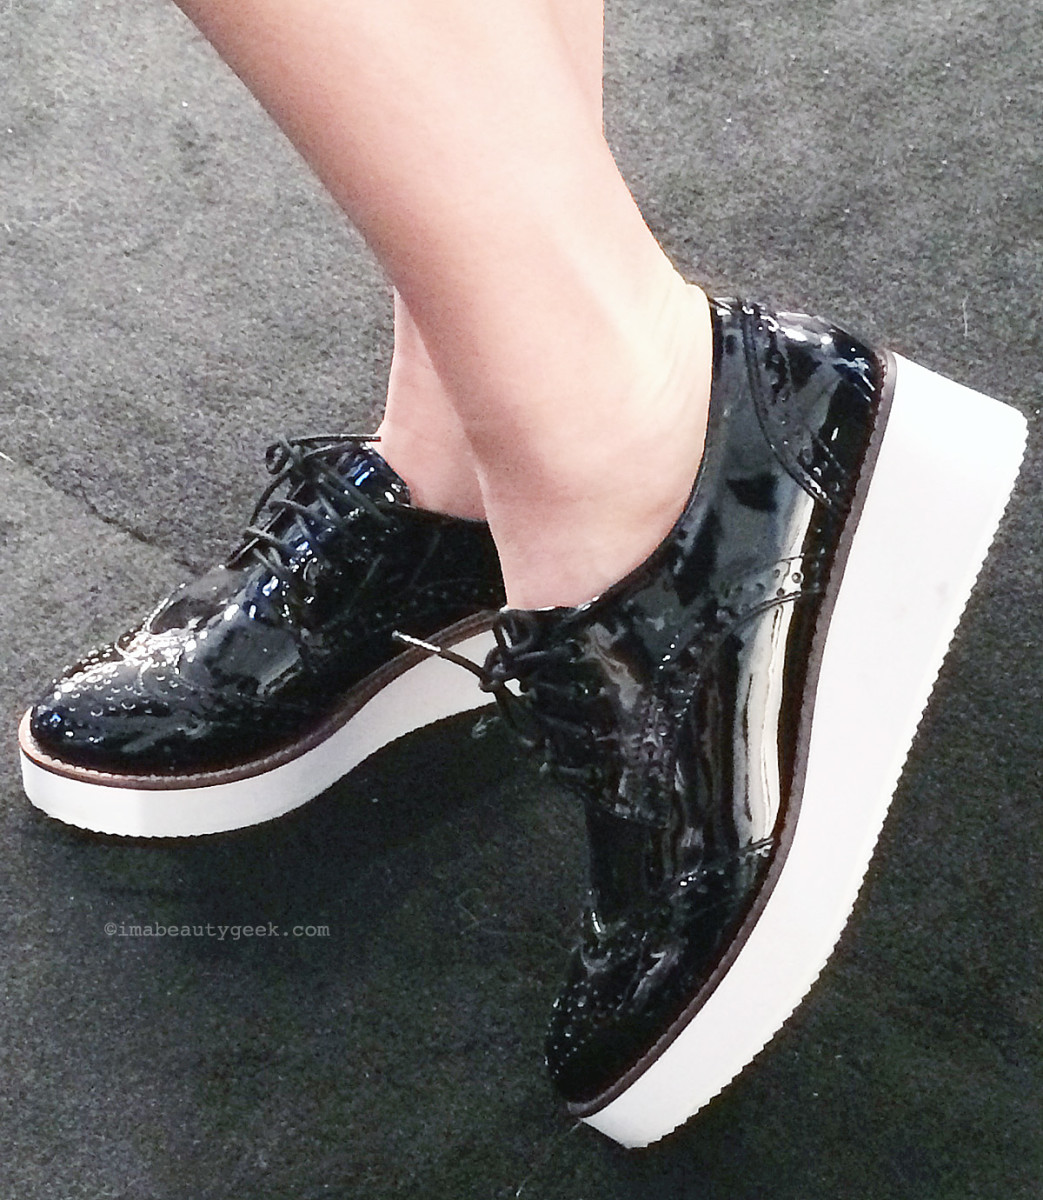 Aldo Taborri lace-up patent brogues with a flatform rubber sole, worn by Essie's Rita Remark at TFW.